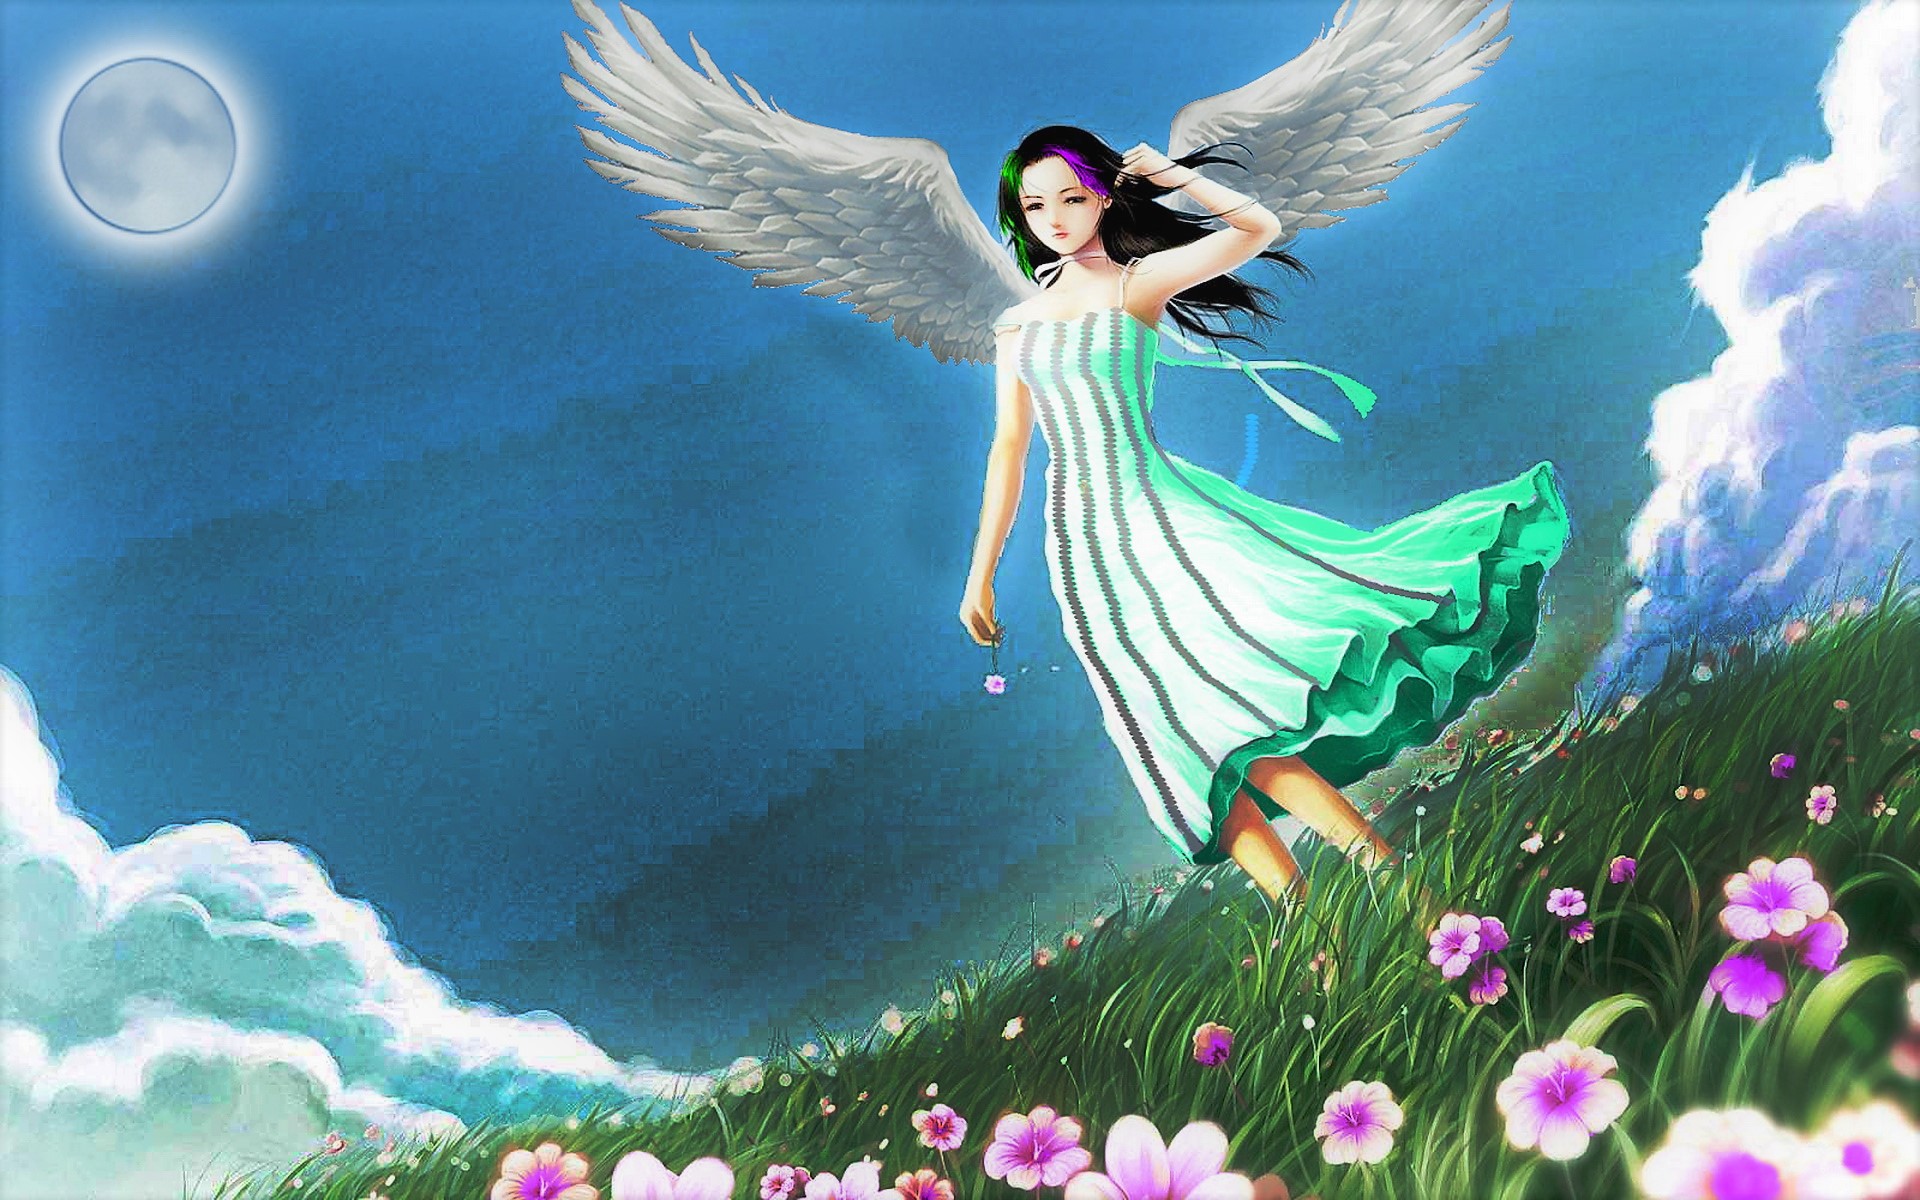 Anime Angel in Flower Field - Image Abyss